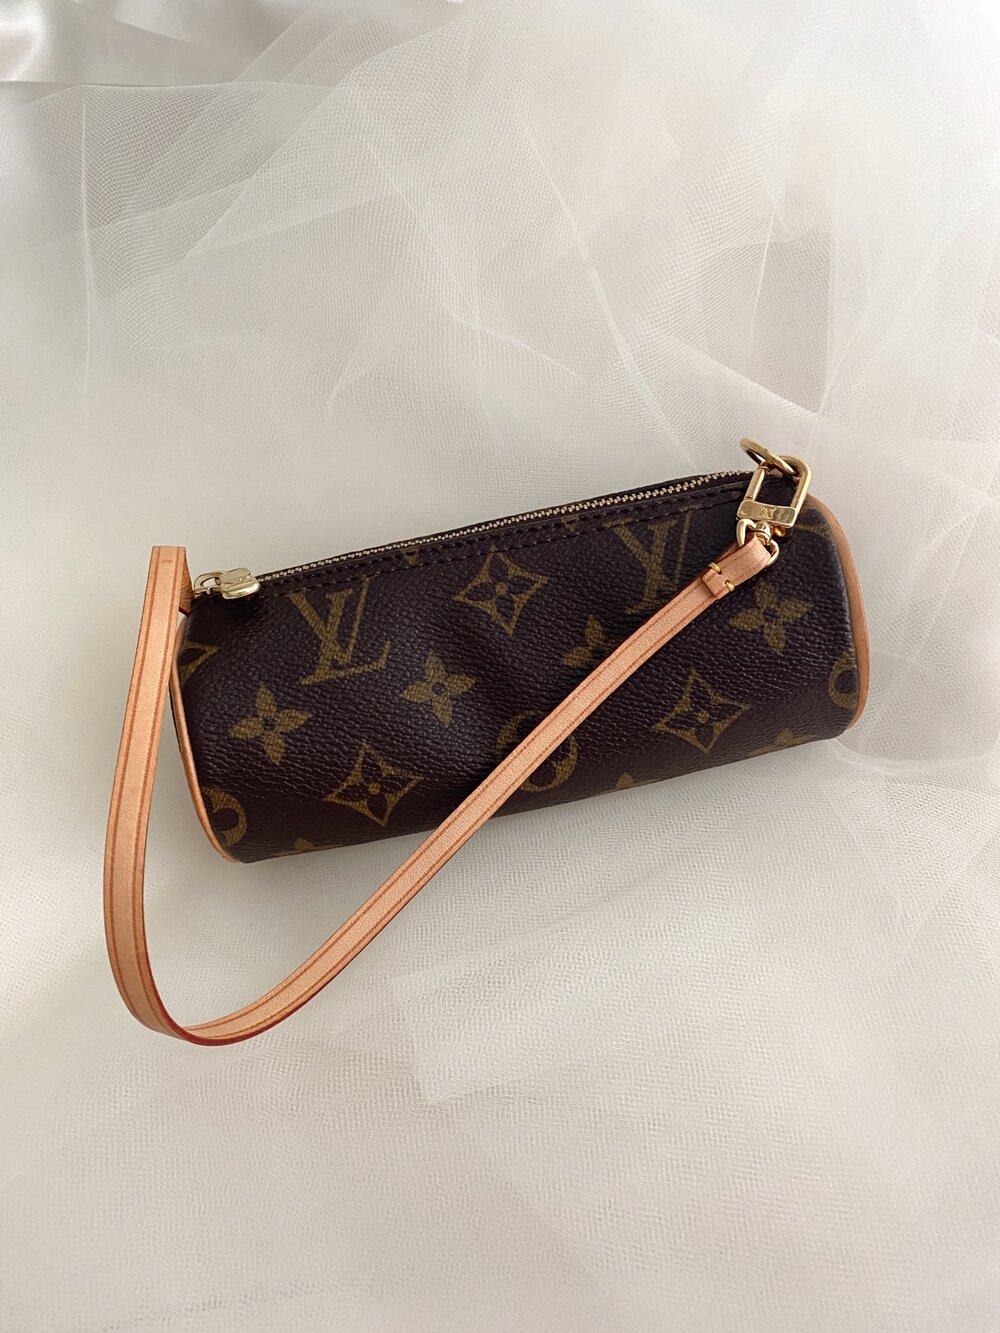 gently used louis vuitton mini papillons both $400. the absolute